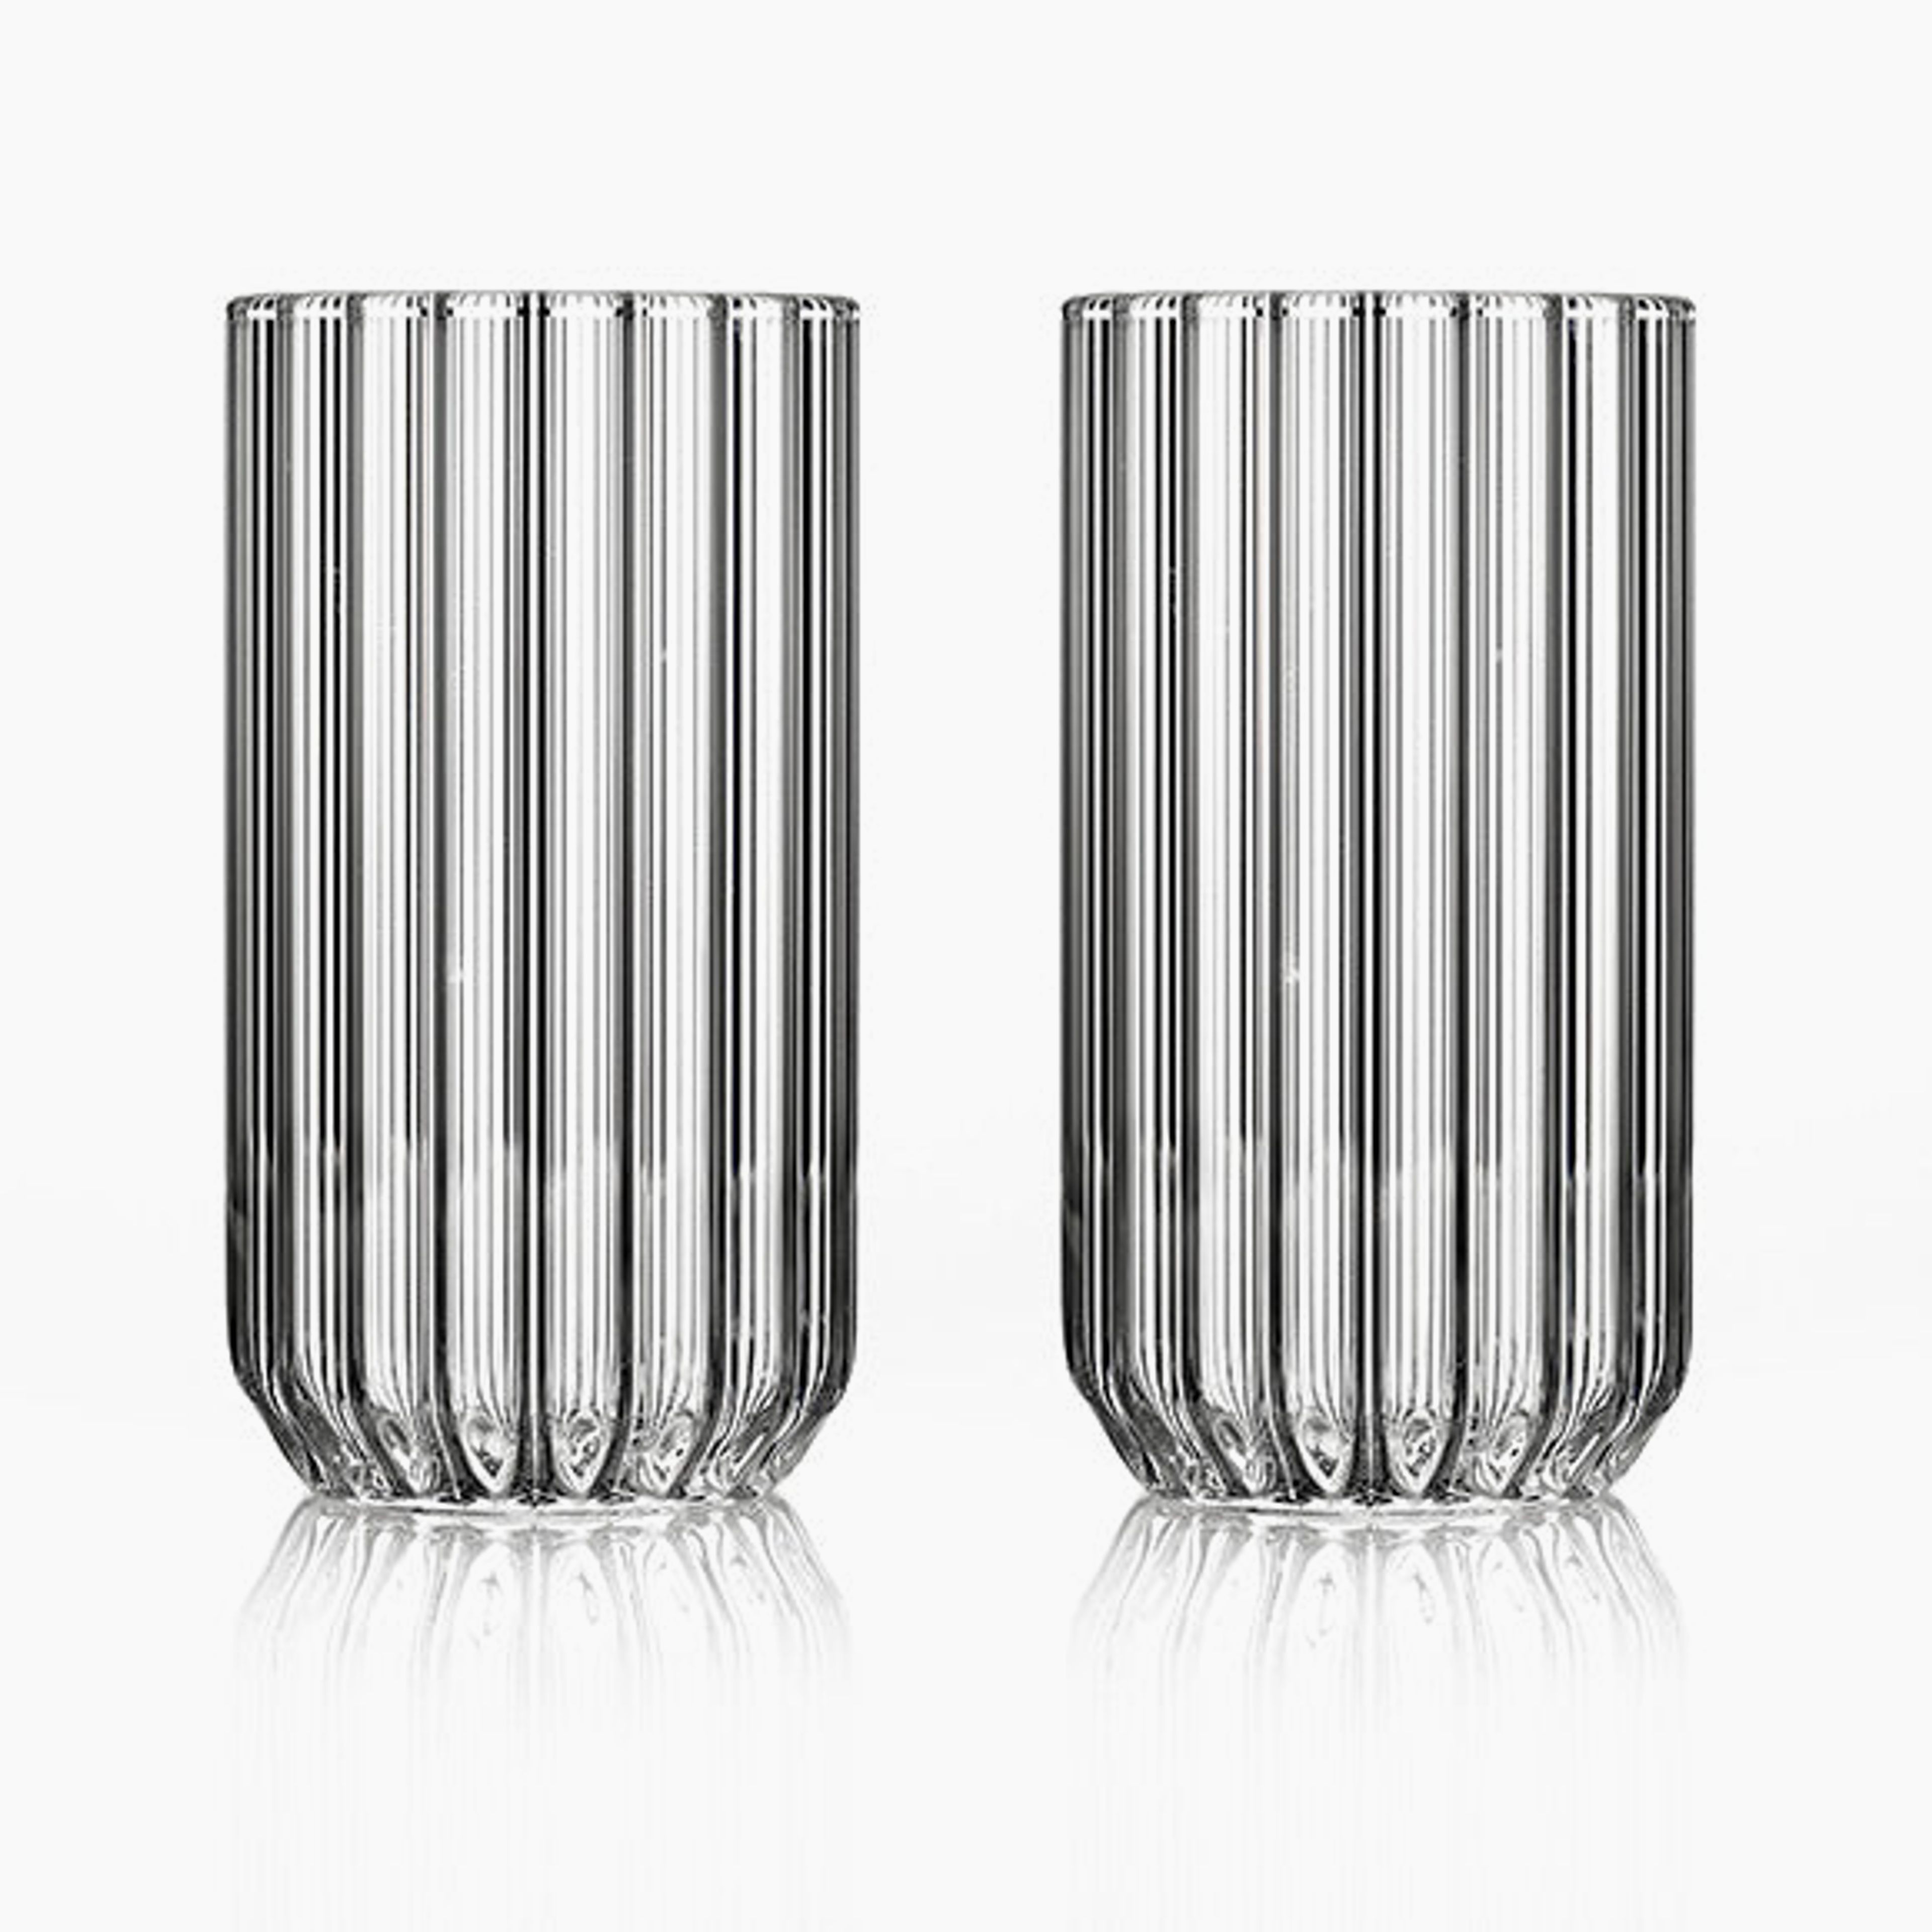 Dearborn Large Glass - Set of 2